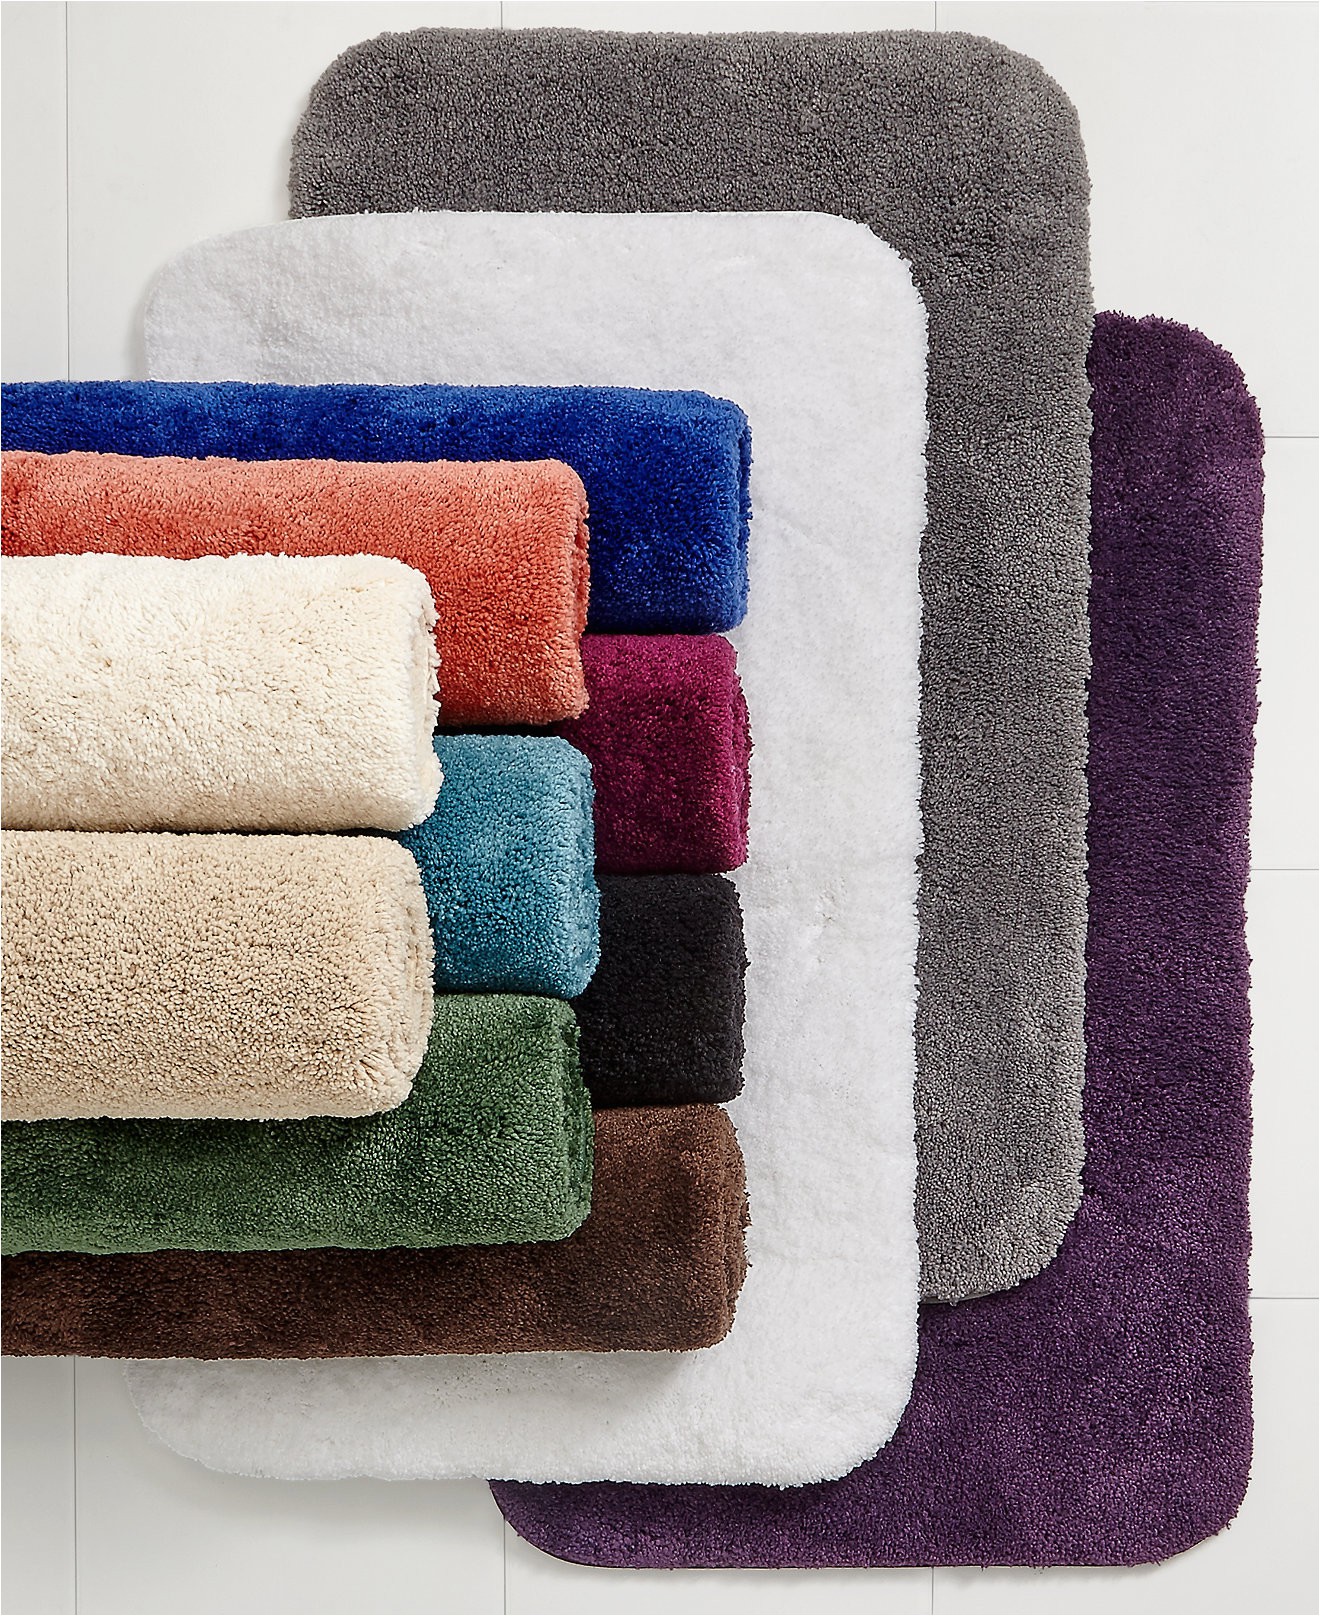 Jcpenney Bathroom Runner Rugs Jcpenney Bathroom Rugs Image Of Bathroom and Closet